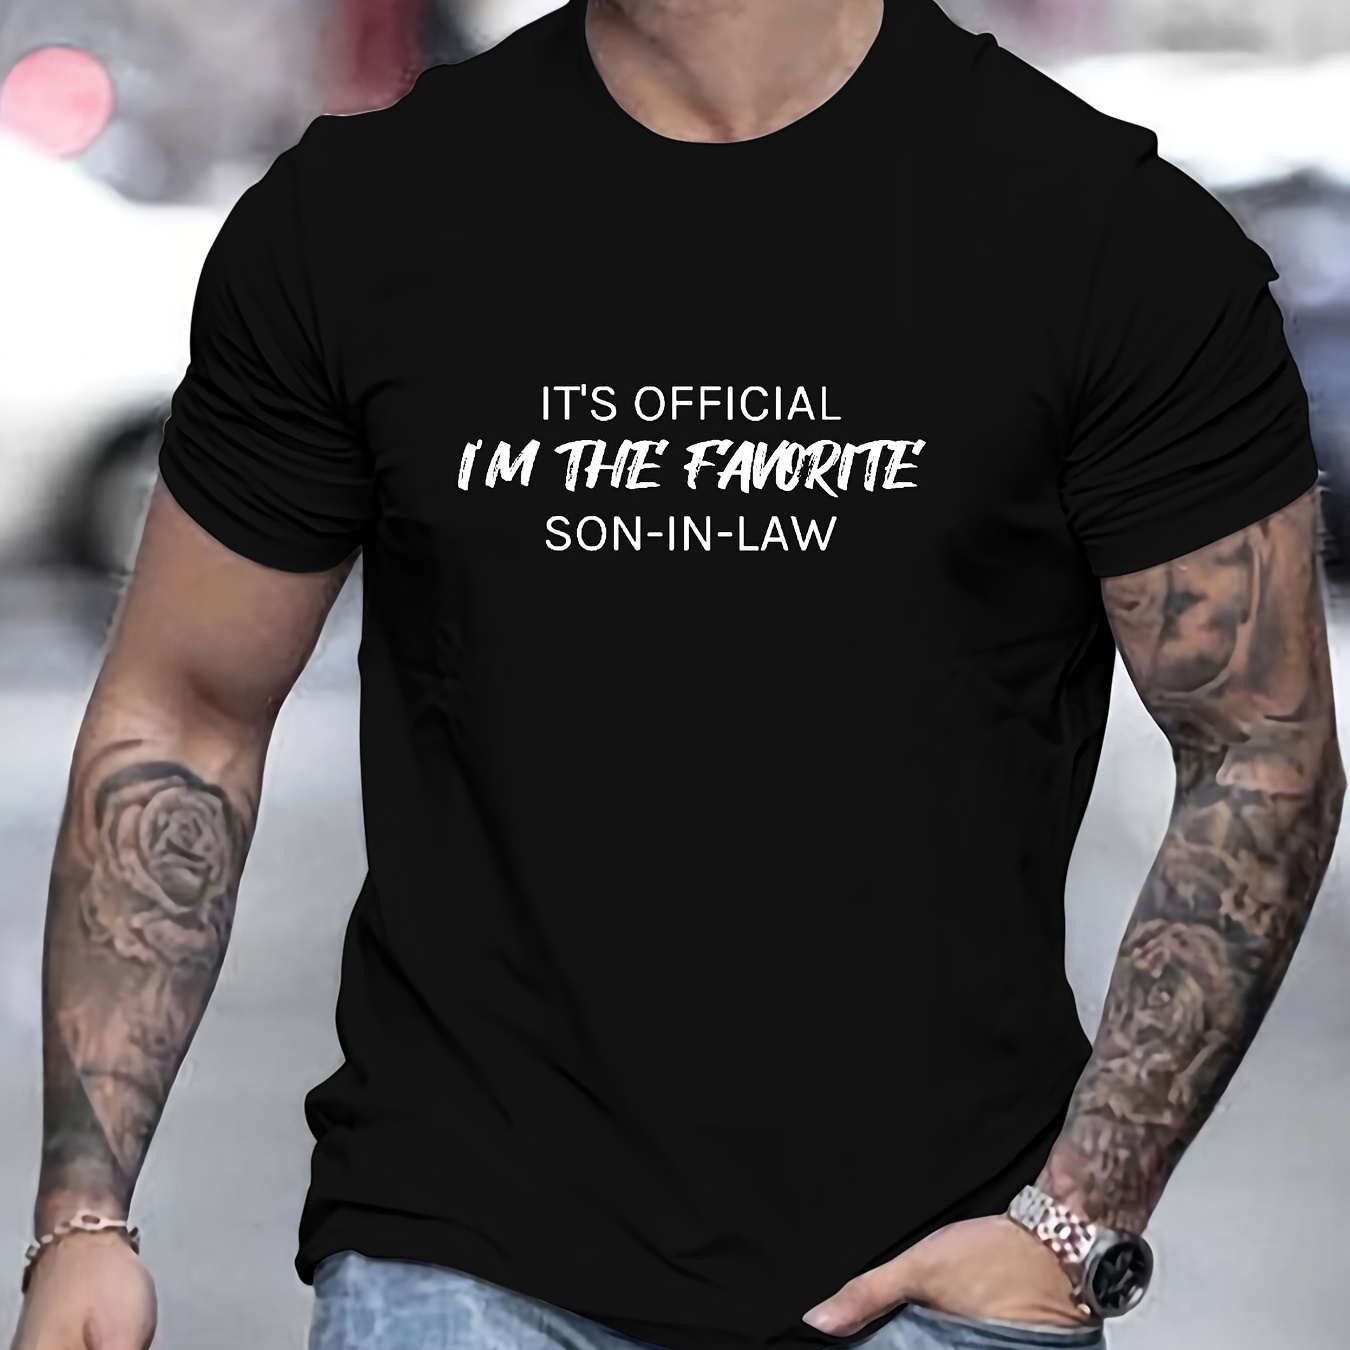 

I'm The Favorite Son-in-law Print T Shirt, Tees For Men, Casual Short Sleeve T-shirt For Summer